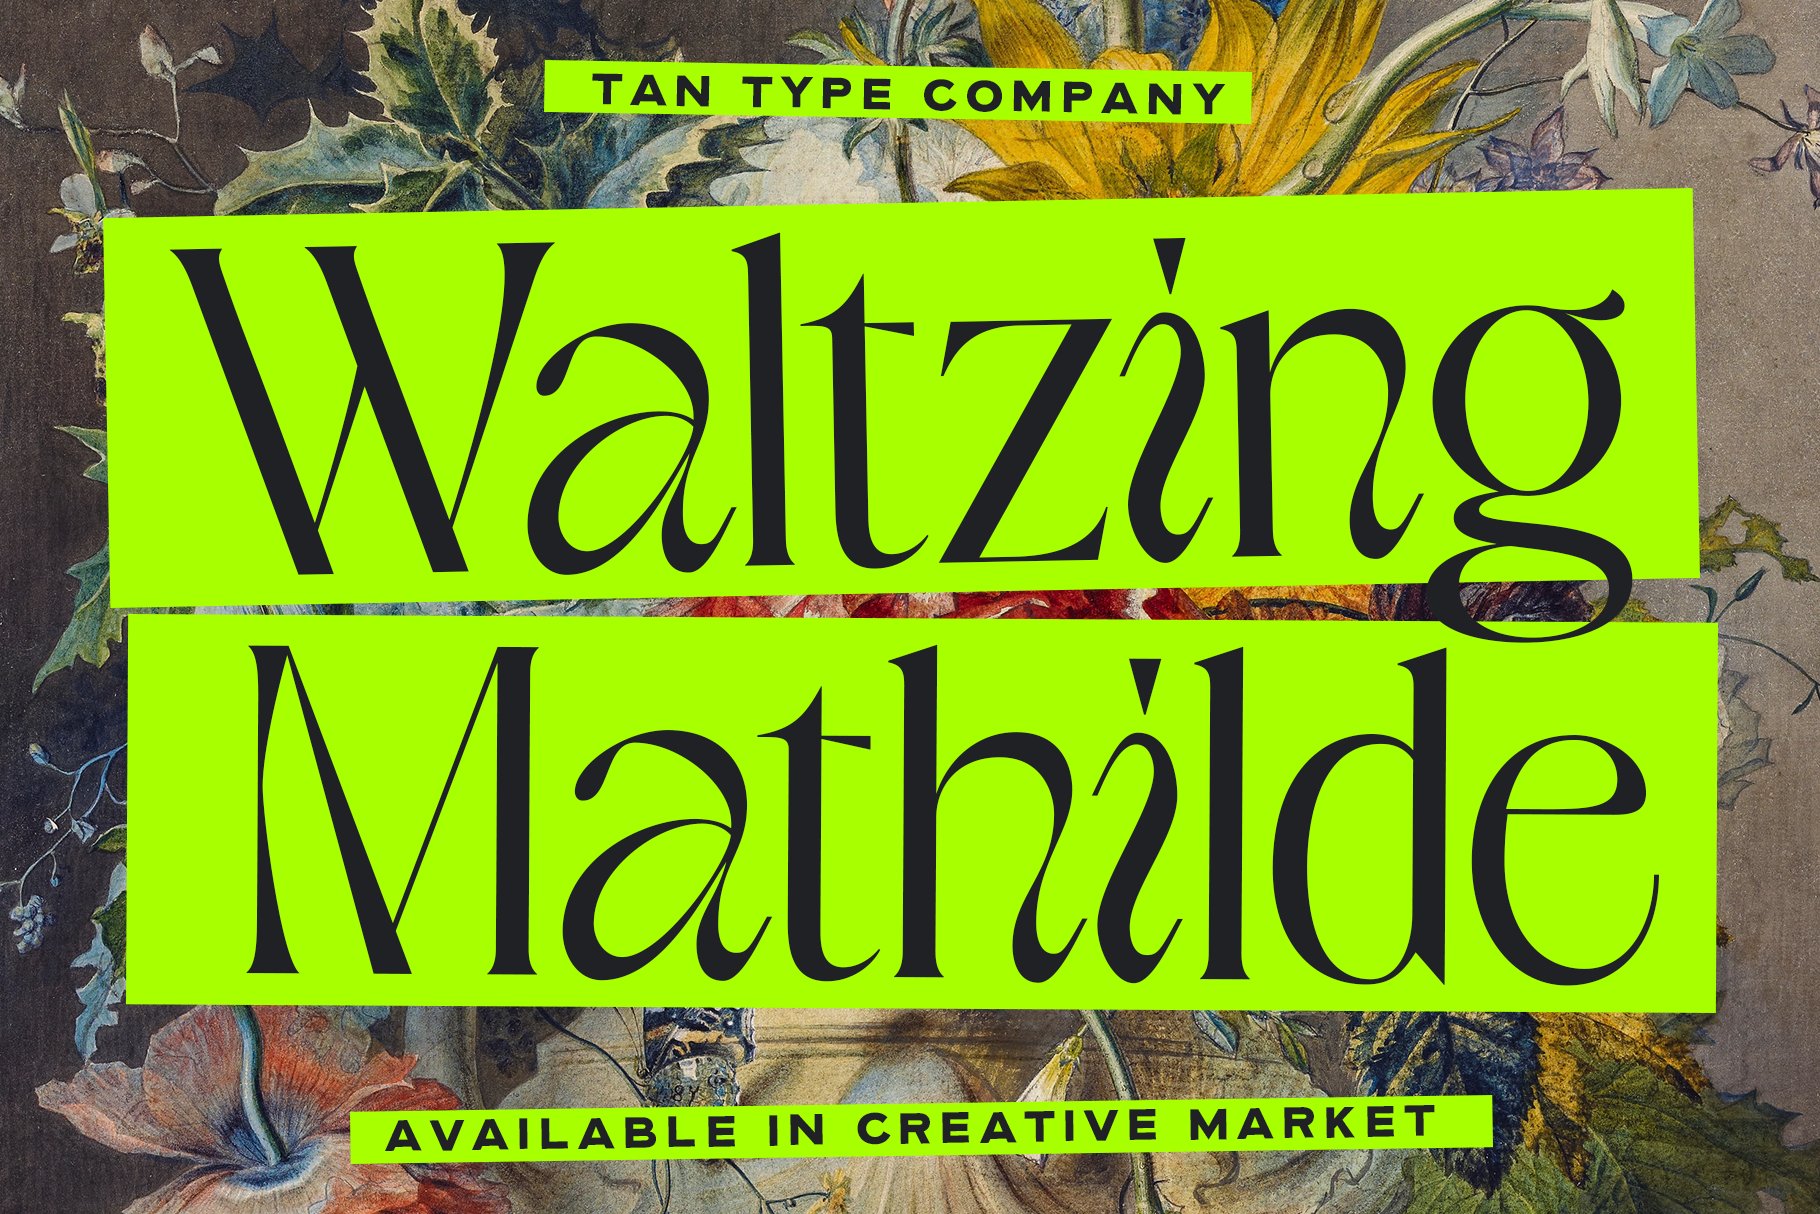 TAN - WALTZING MATHILDE cover image.